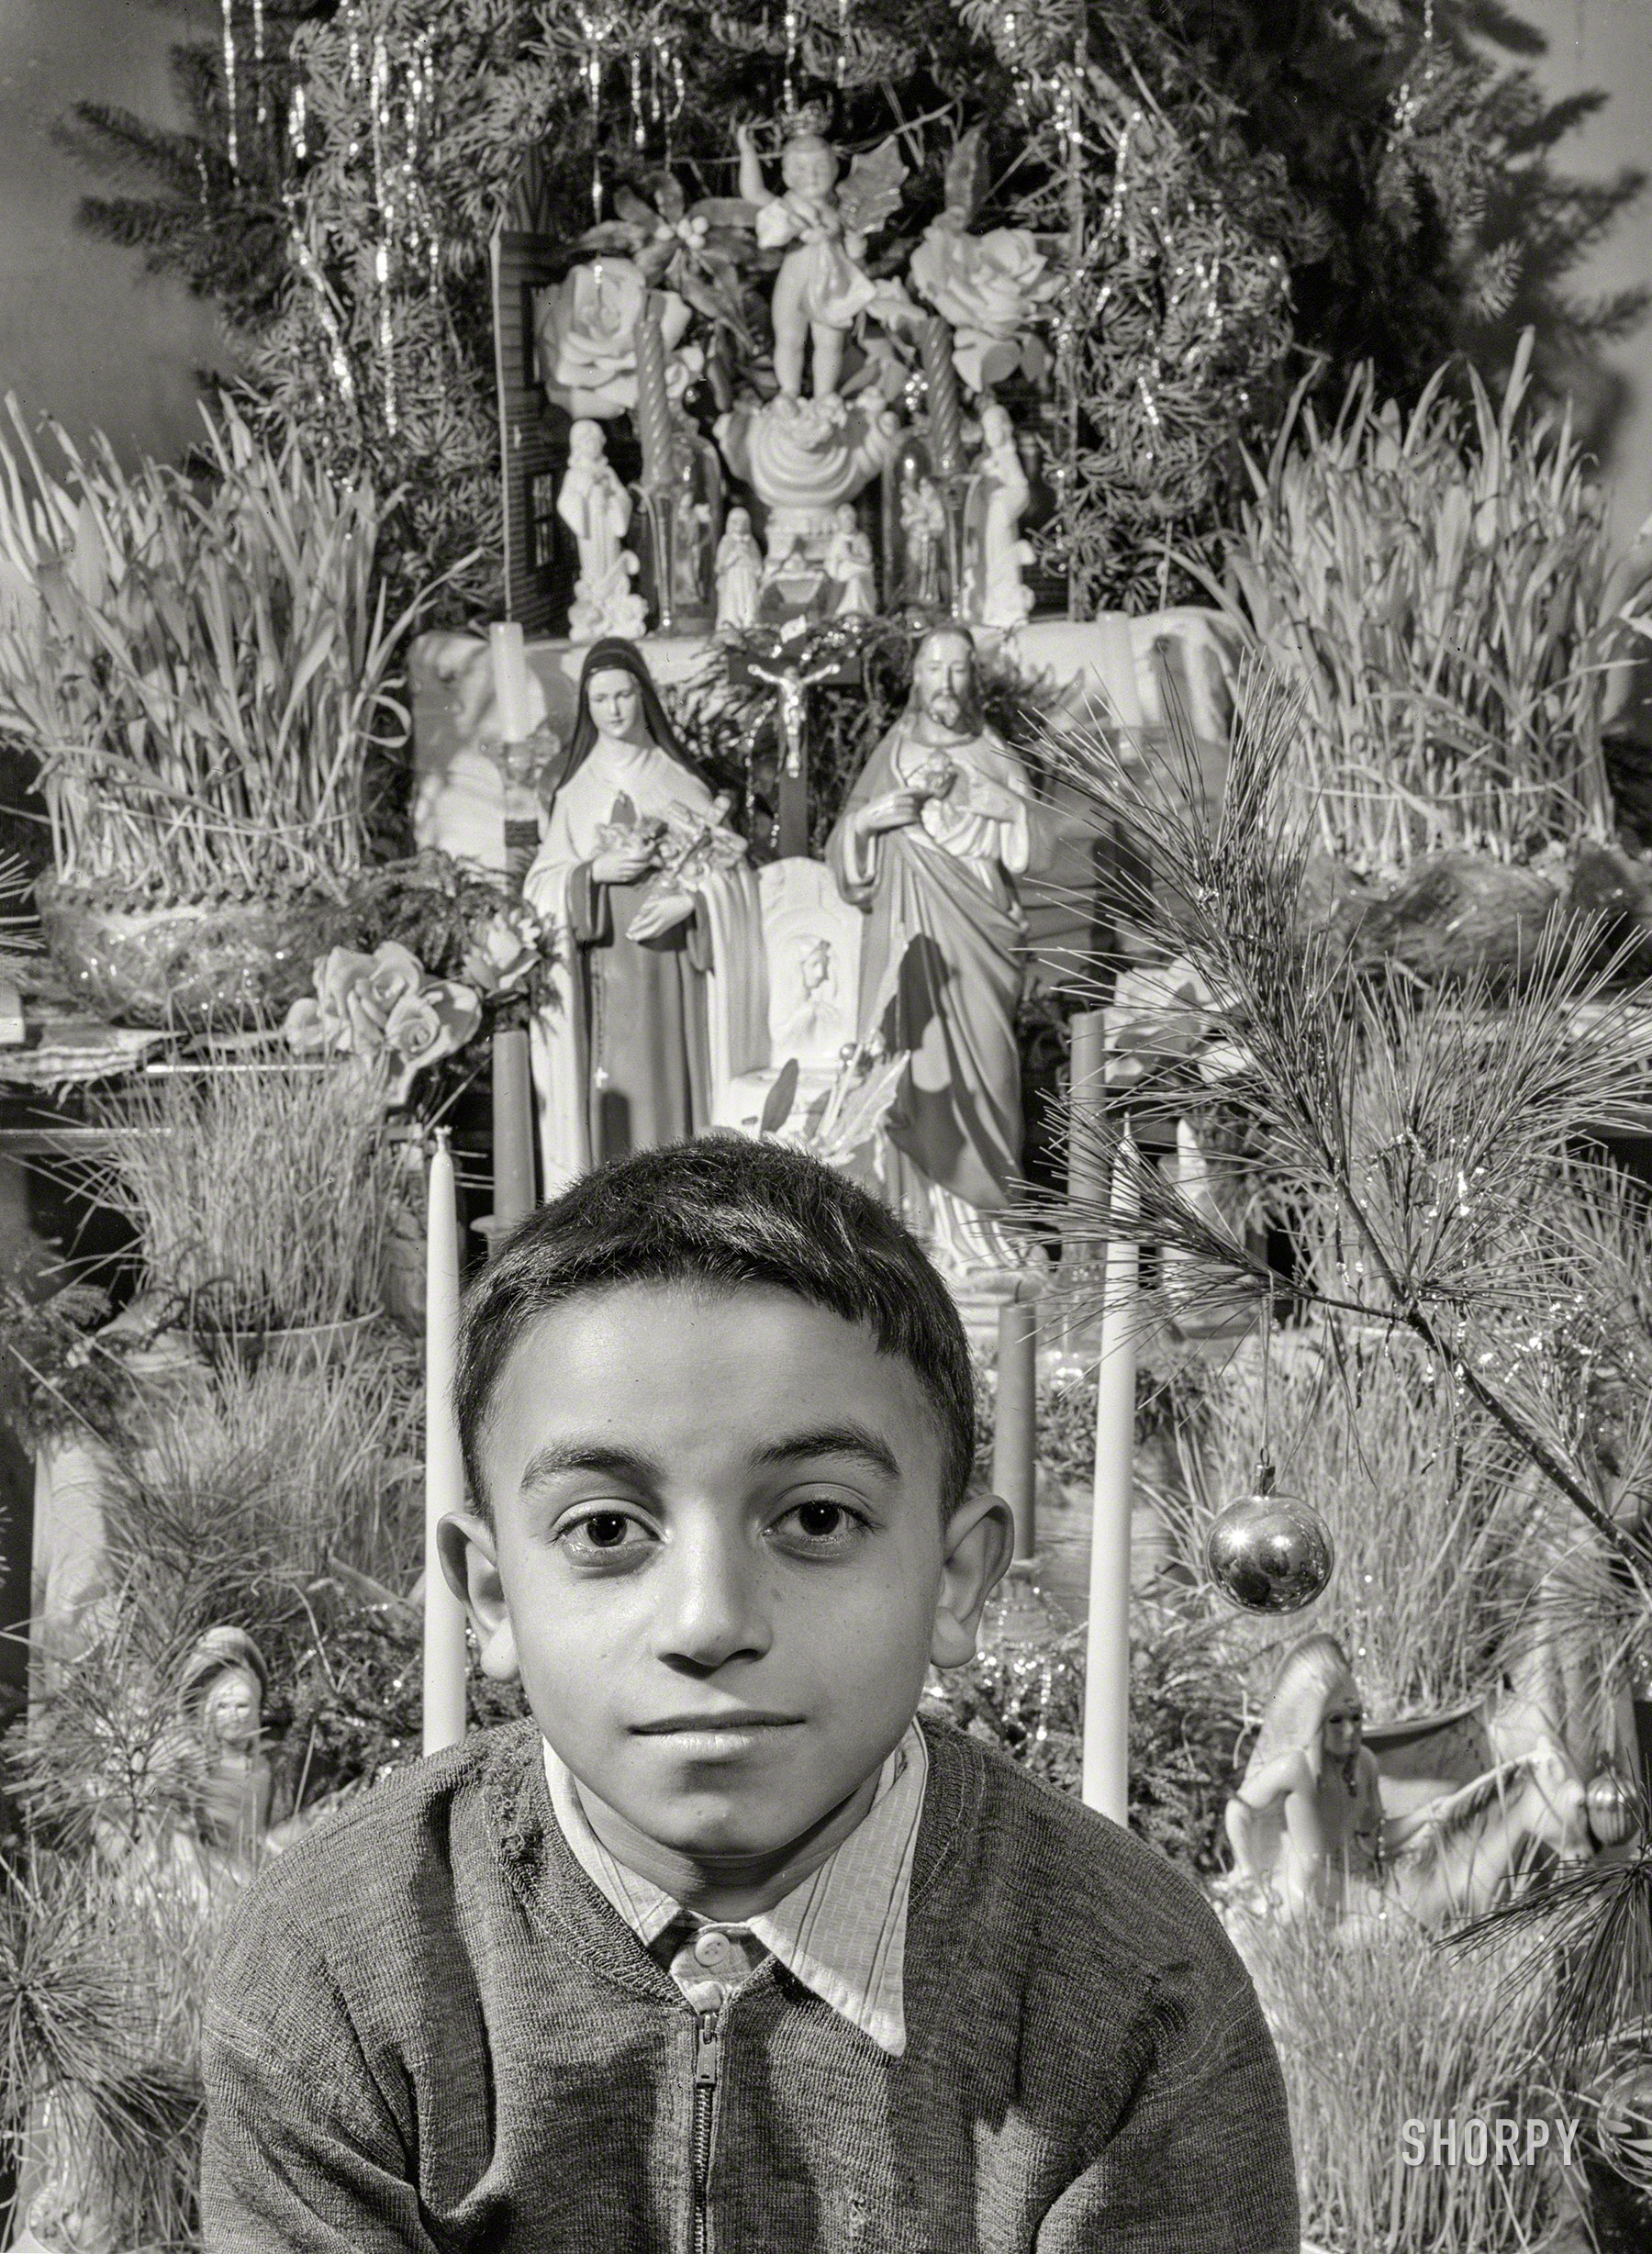 December 1940. "Manuel Andrews, a Portuguese boy near Falmouth, Massachusetts. Family runs a seven-acre vegetable farm and have one 'new' cow of which they are all very proud. Father is a laborer in an Army camp nearby. Shot was taken just after Christmas." The tree decorated with ceramic figures of Mary, Joseph and Geronimo. Acetate negative by Jack Delano. View full size.